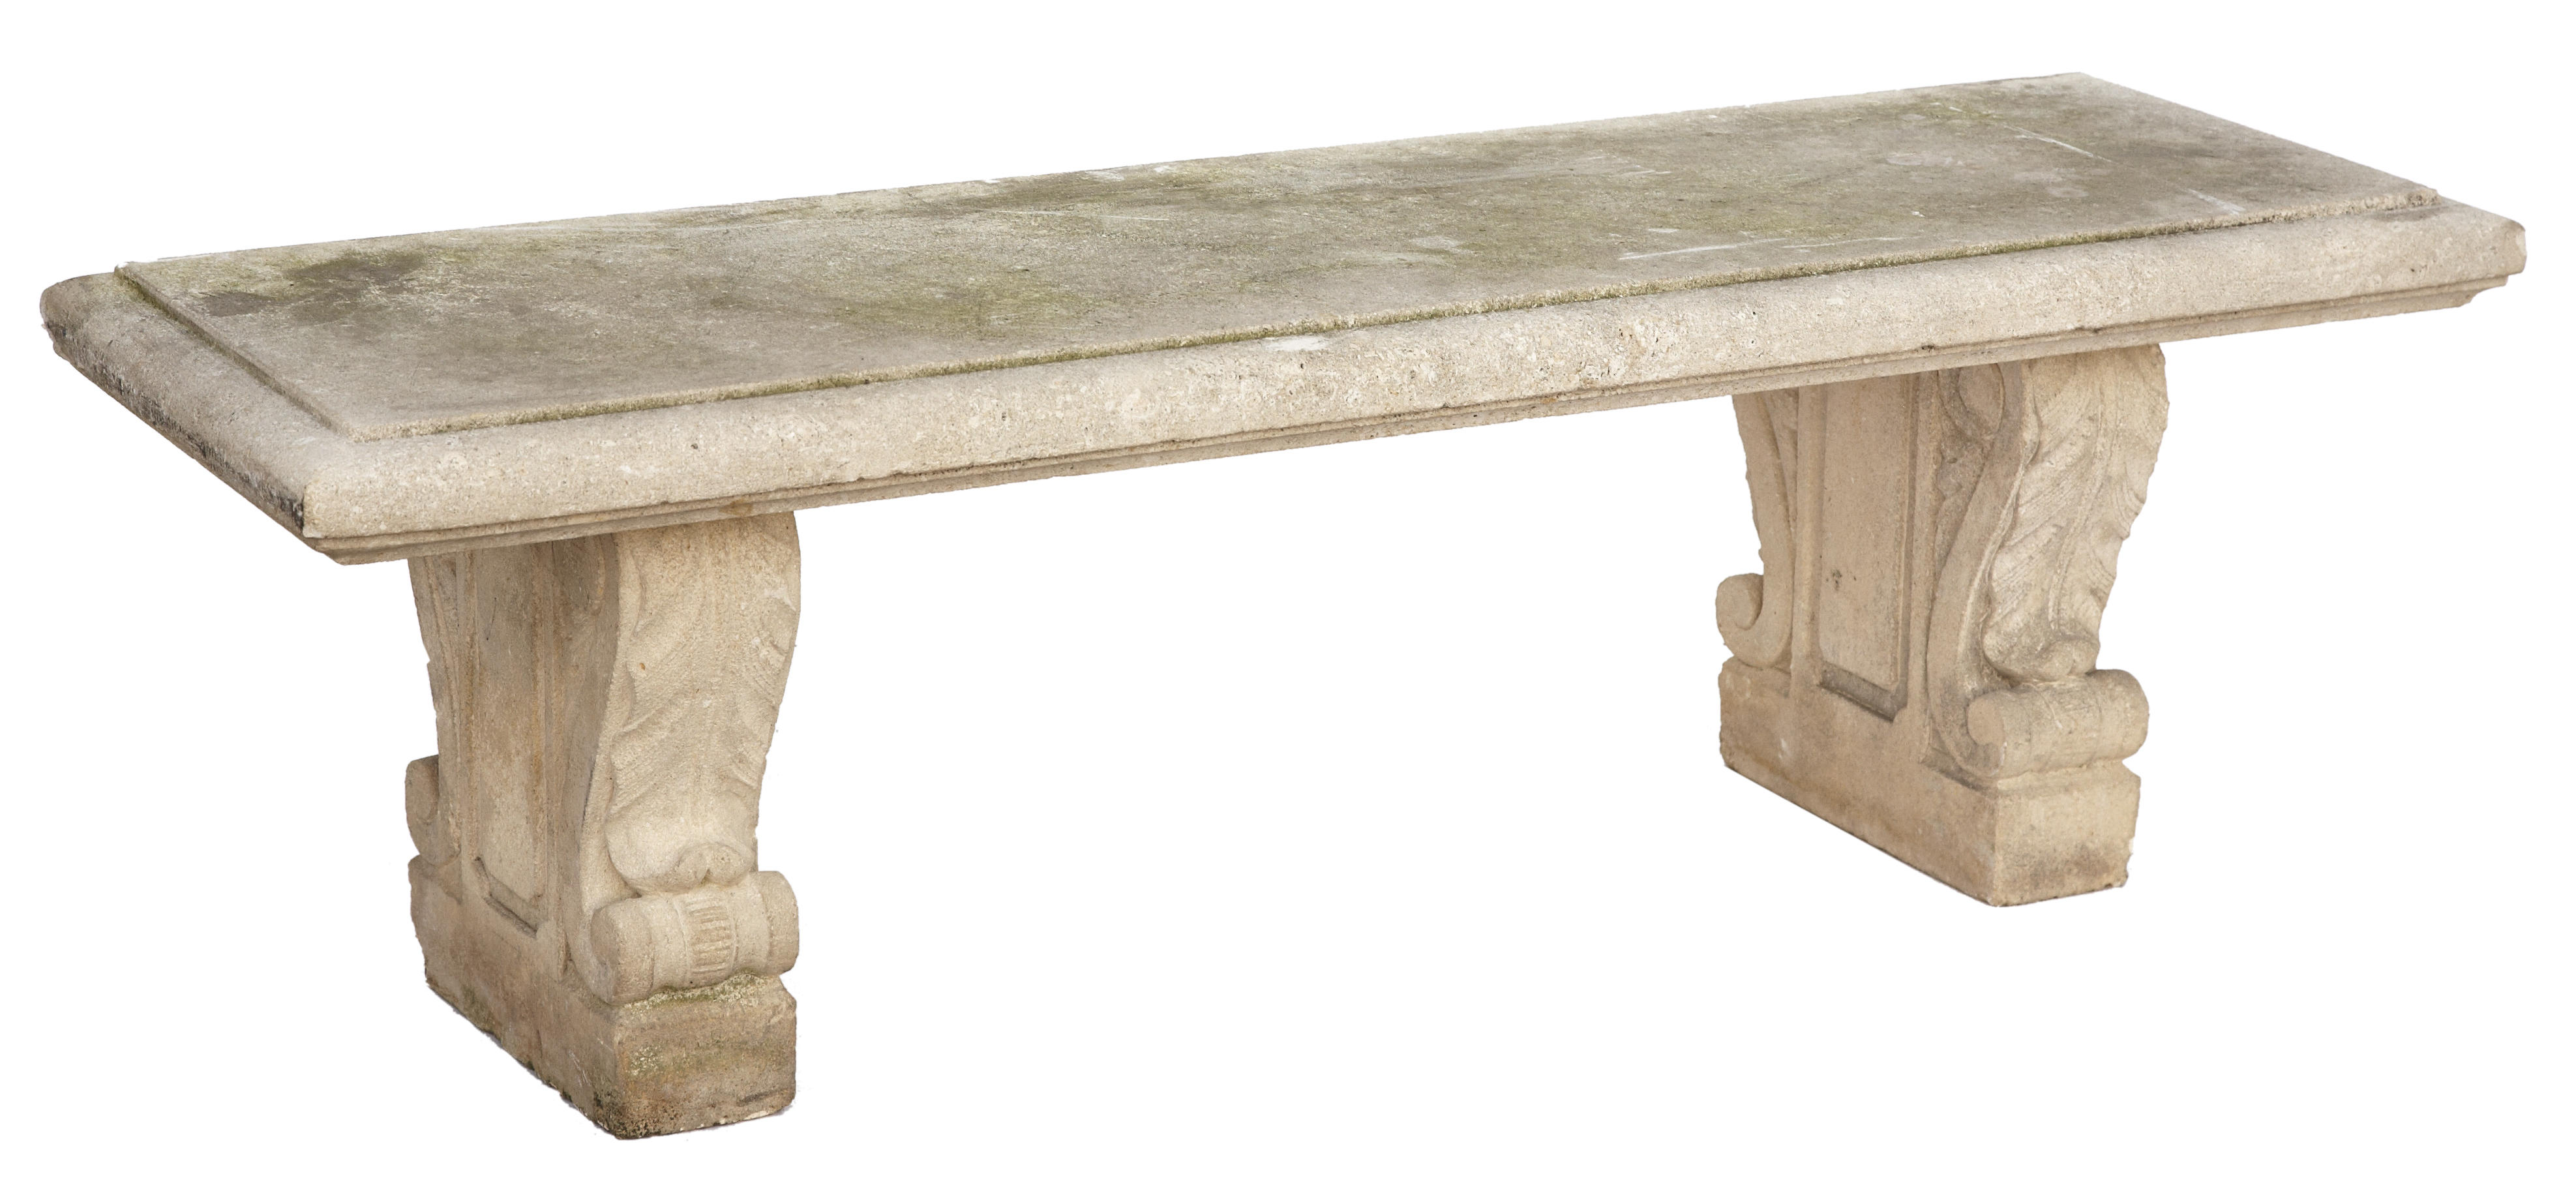 A Baroque style cast stone bench 12ada9